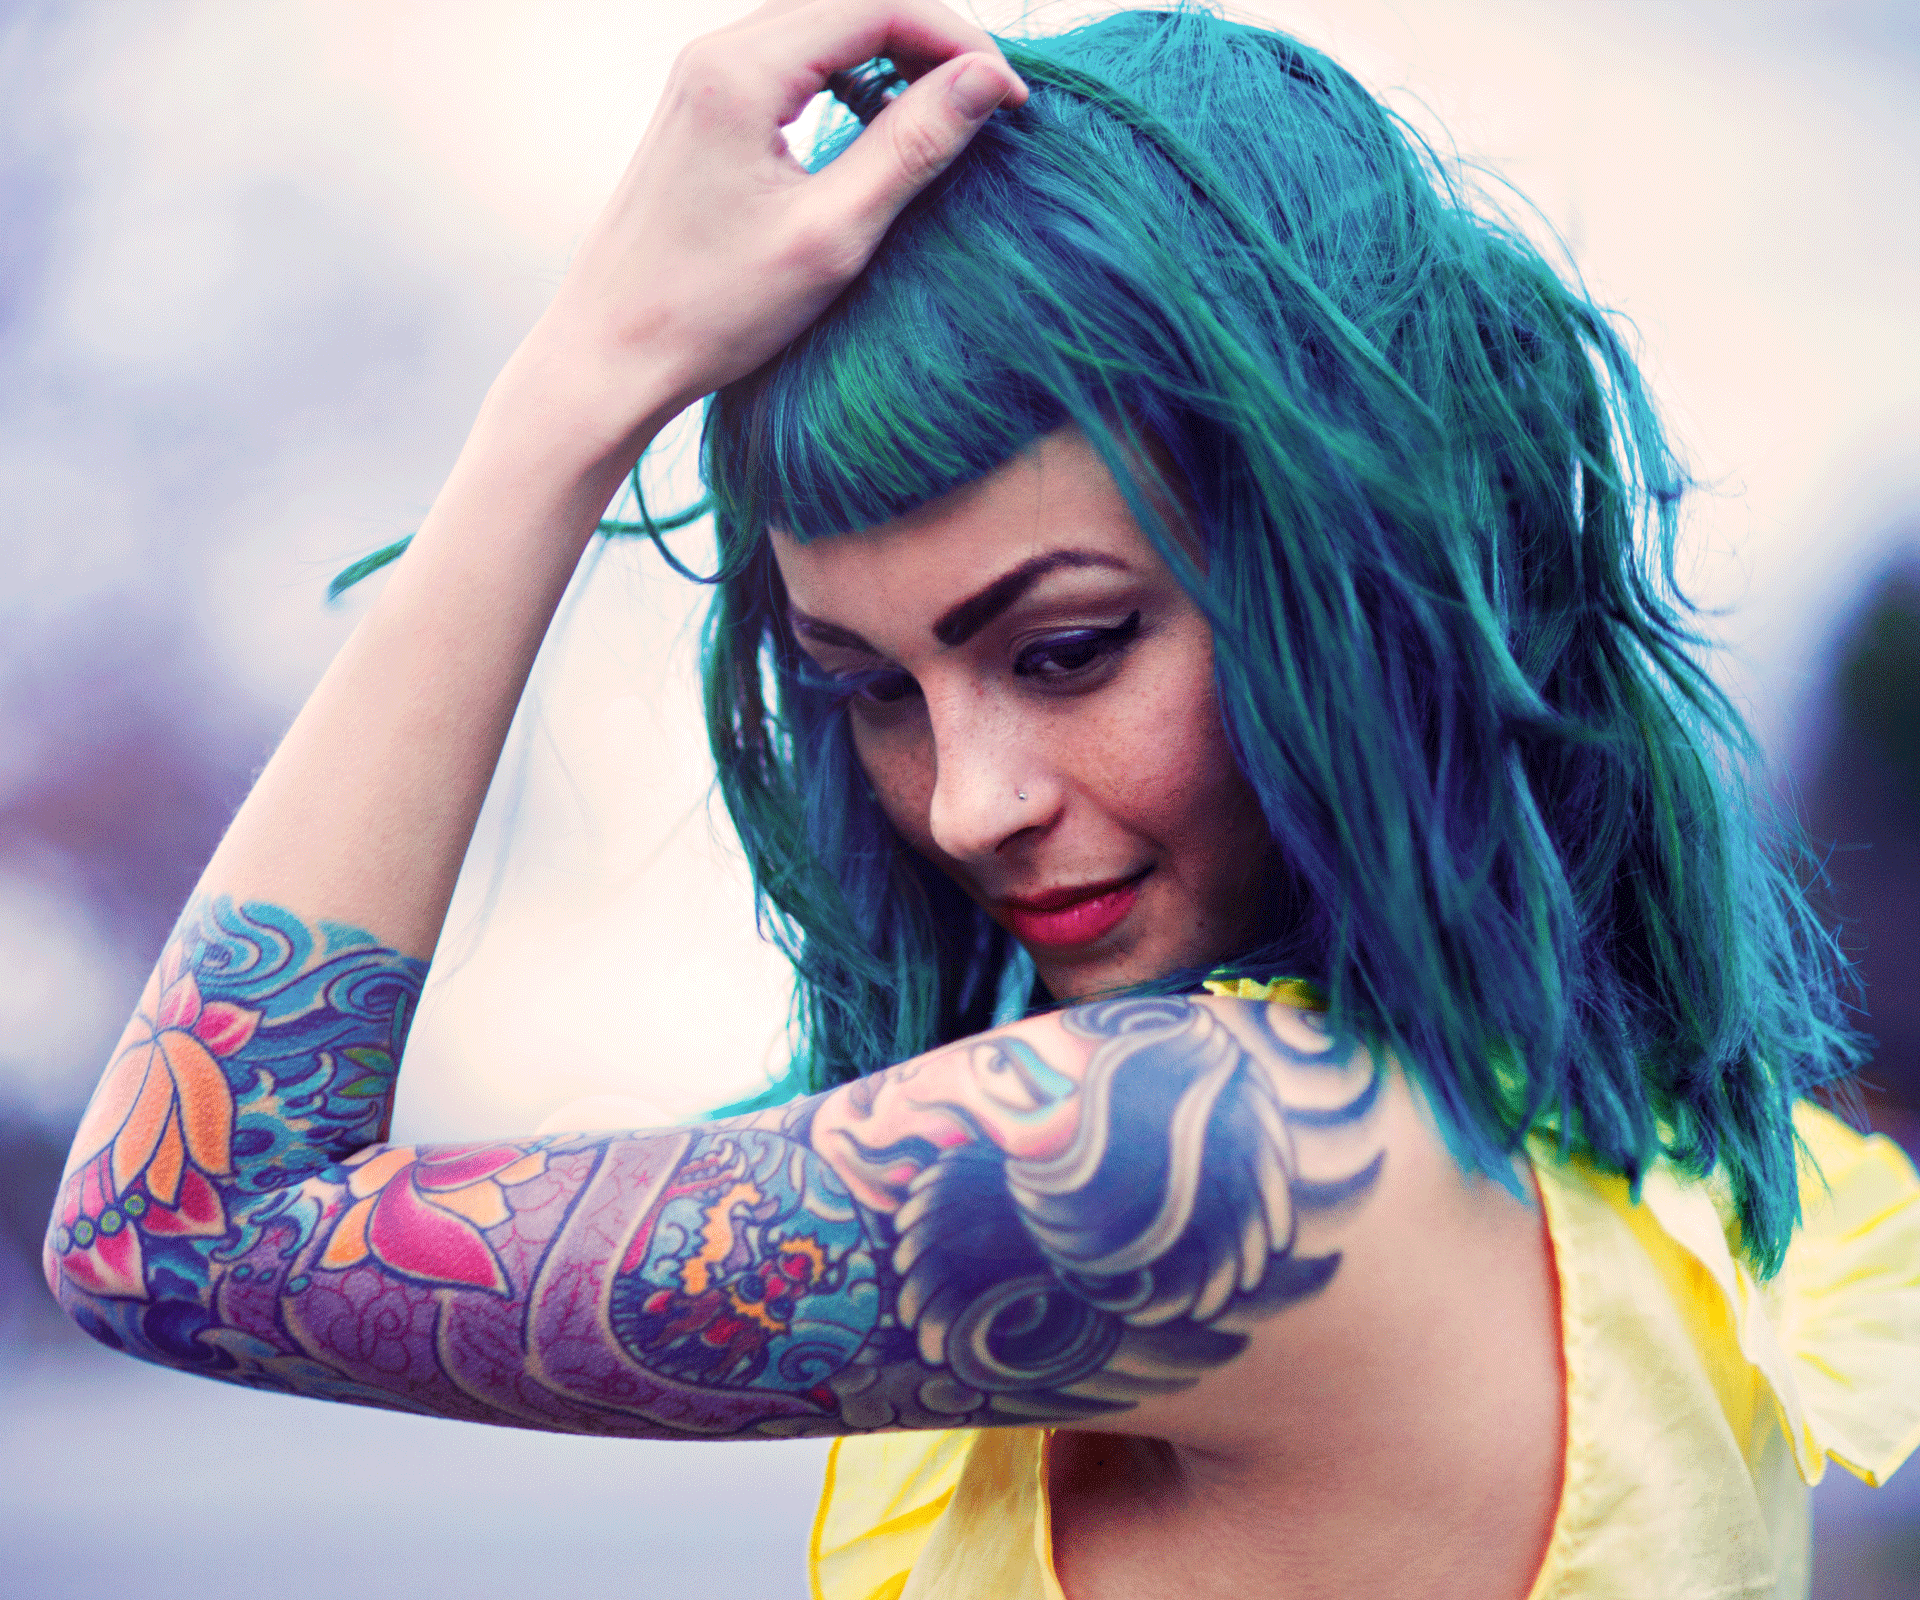 Girl with green hair and tattoos